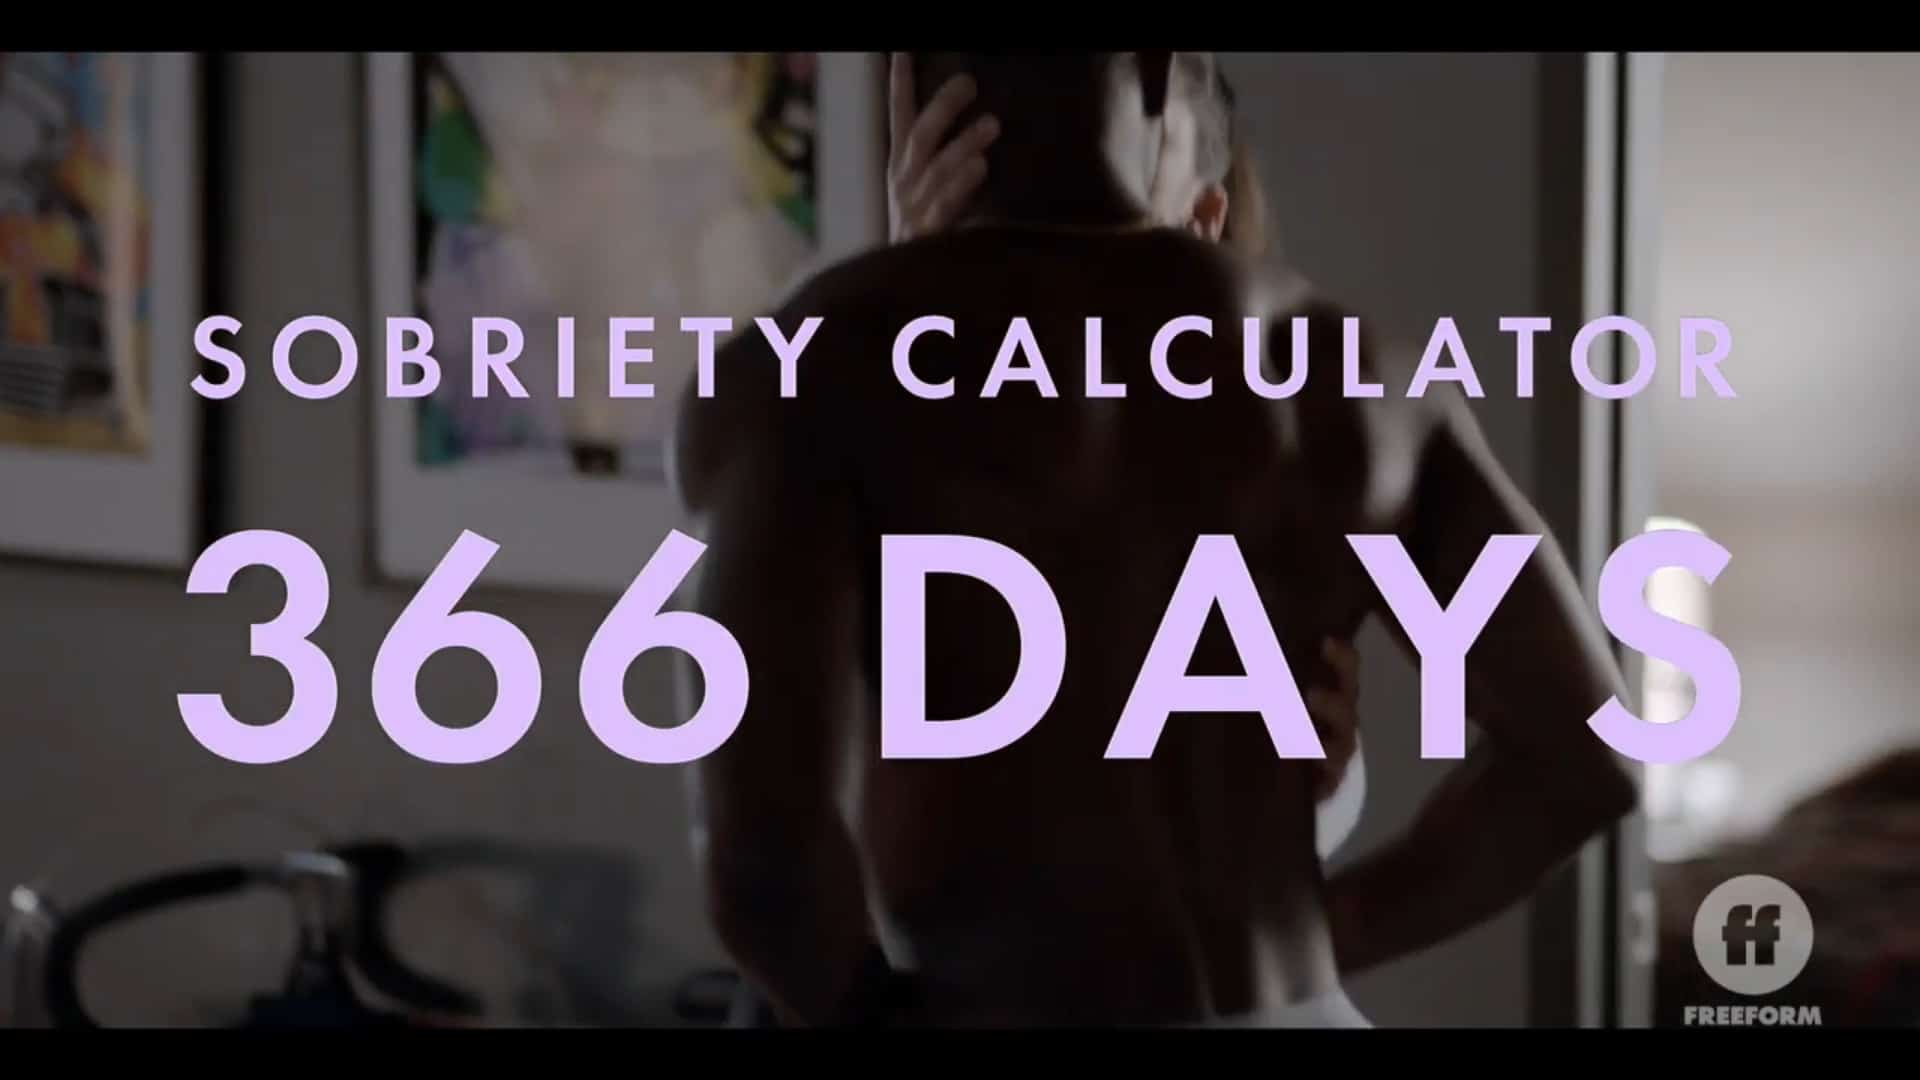 A title card noting Sam is 366 days sober